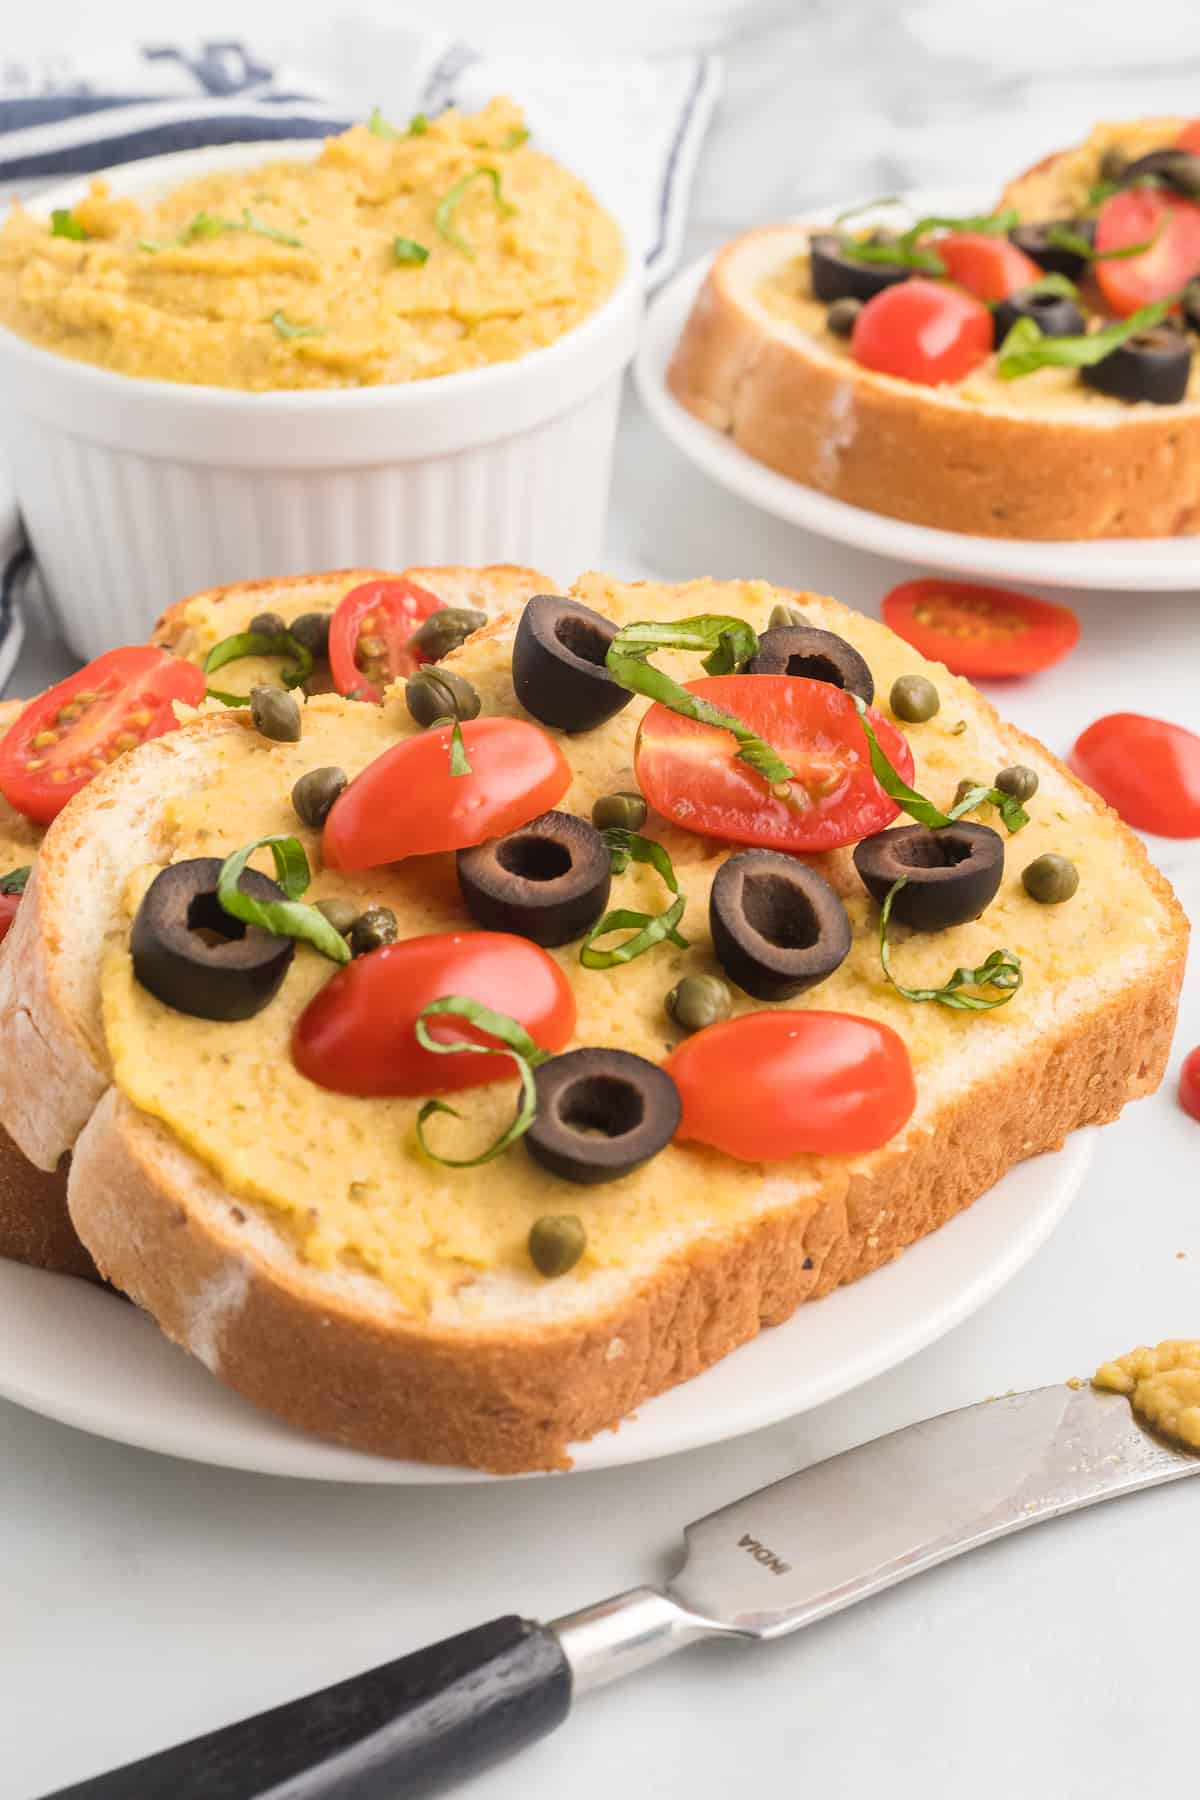 fresh garlic hummus spread over bread and topped with olives, tomatoes, and basil.